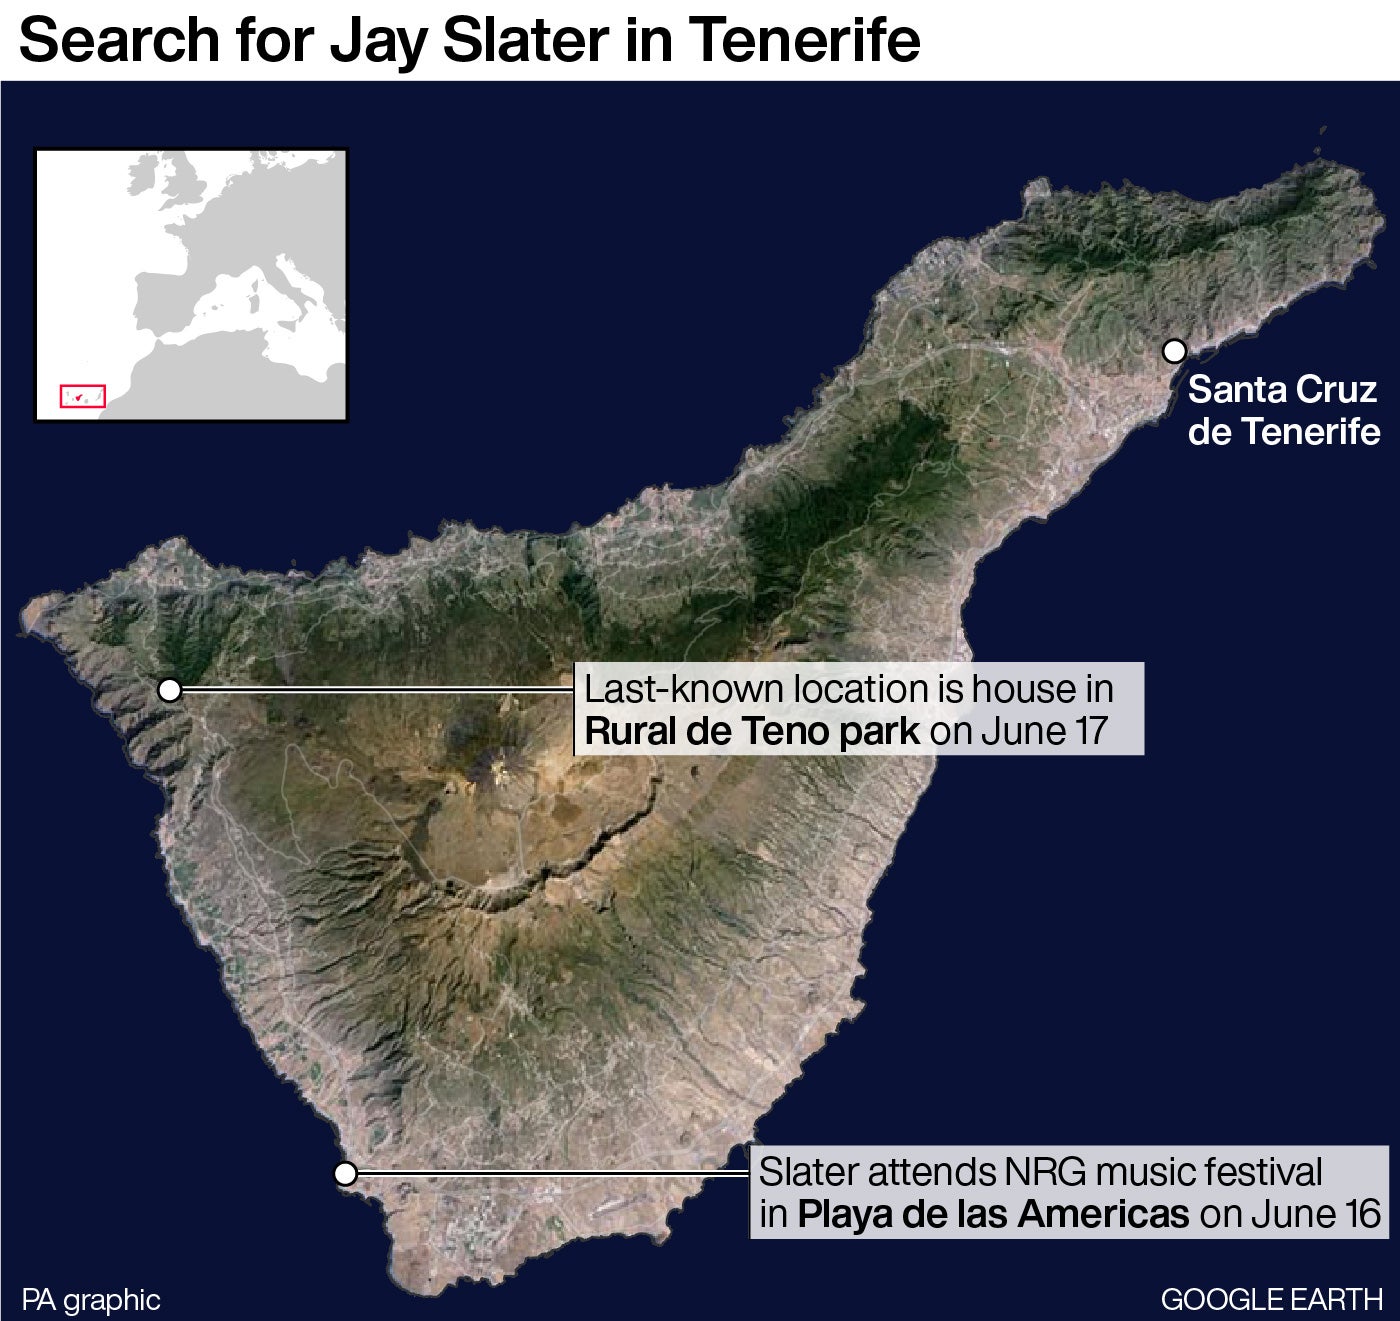 His last location is about 37km away from where he had been partying in Playa de Las Americas